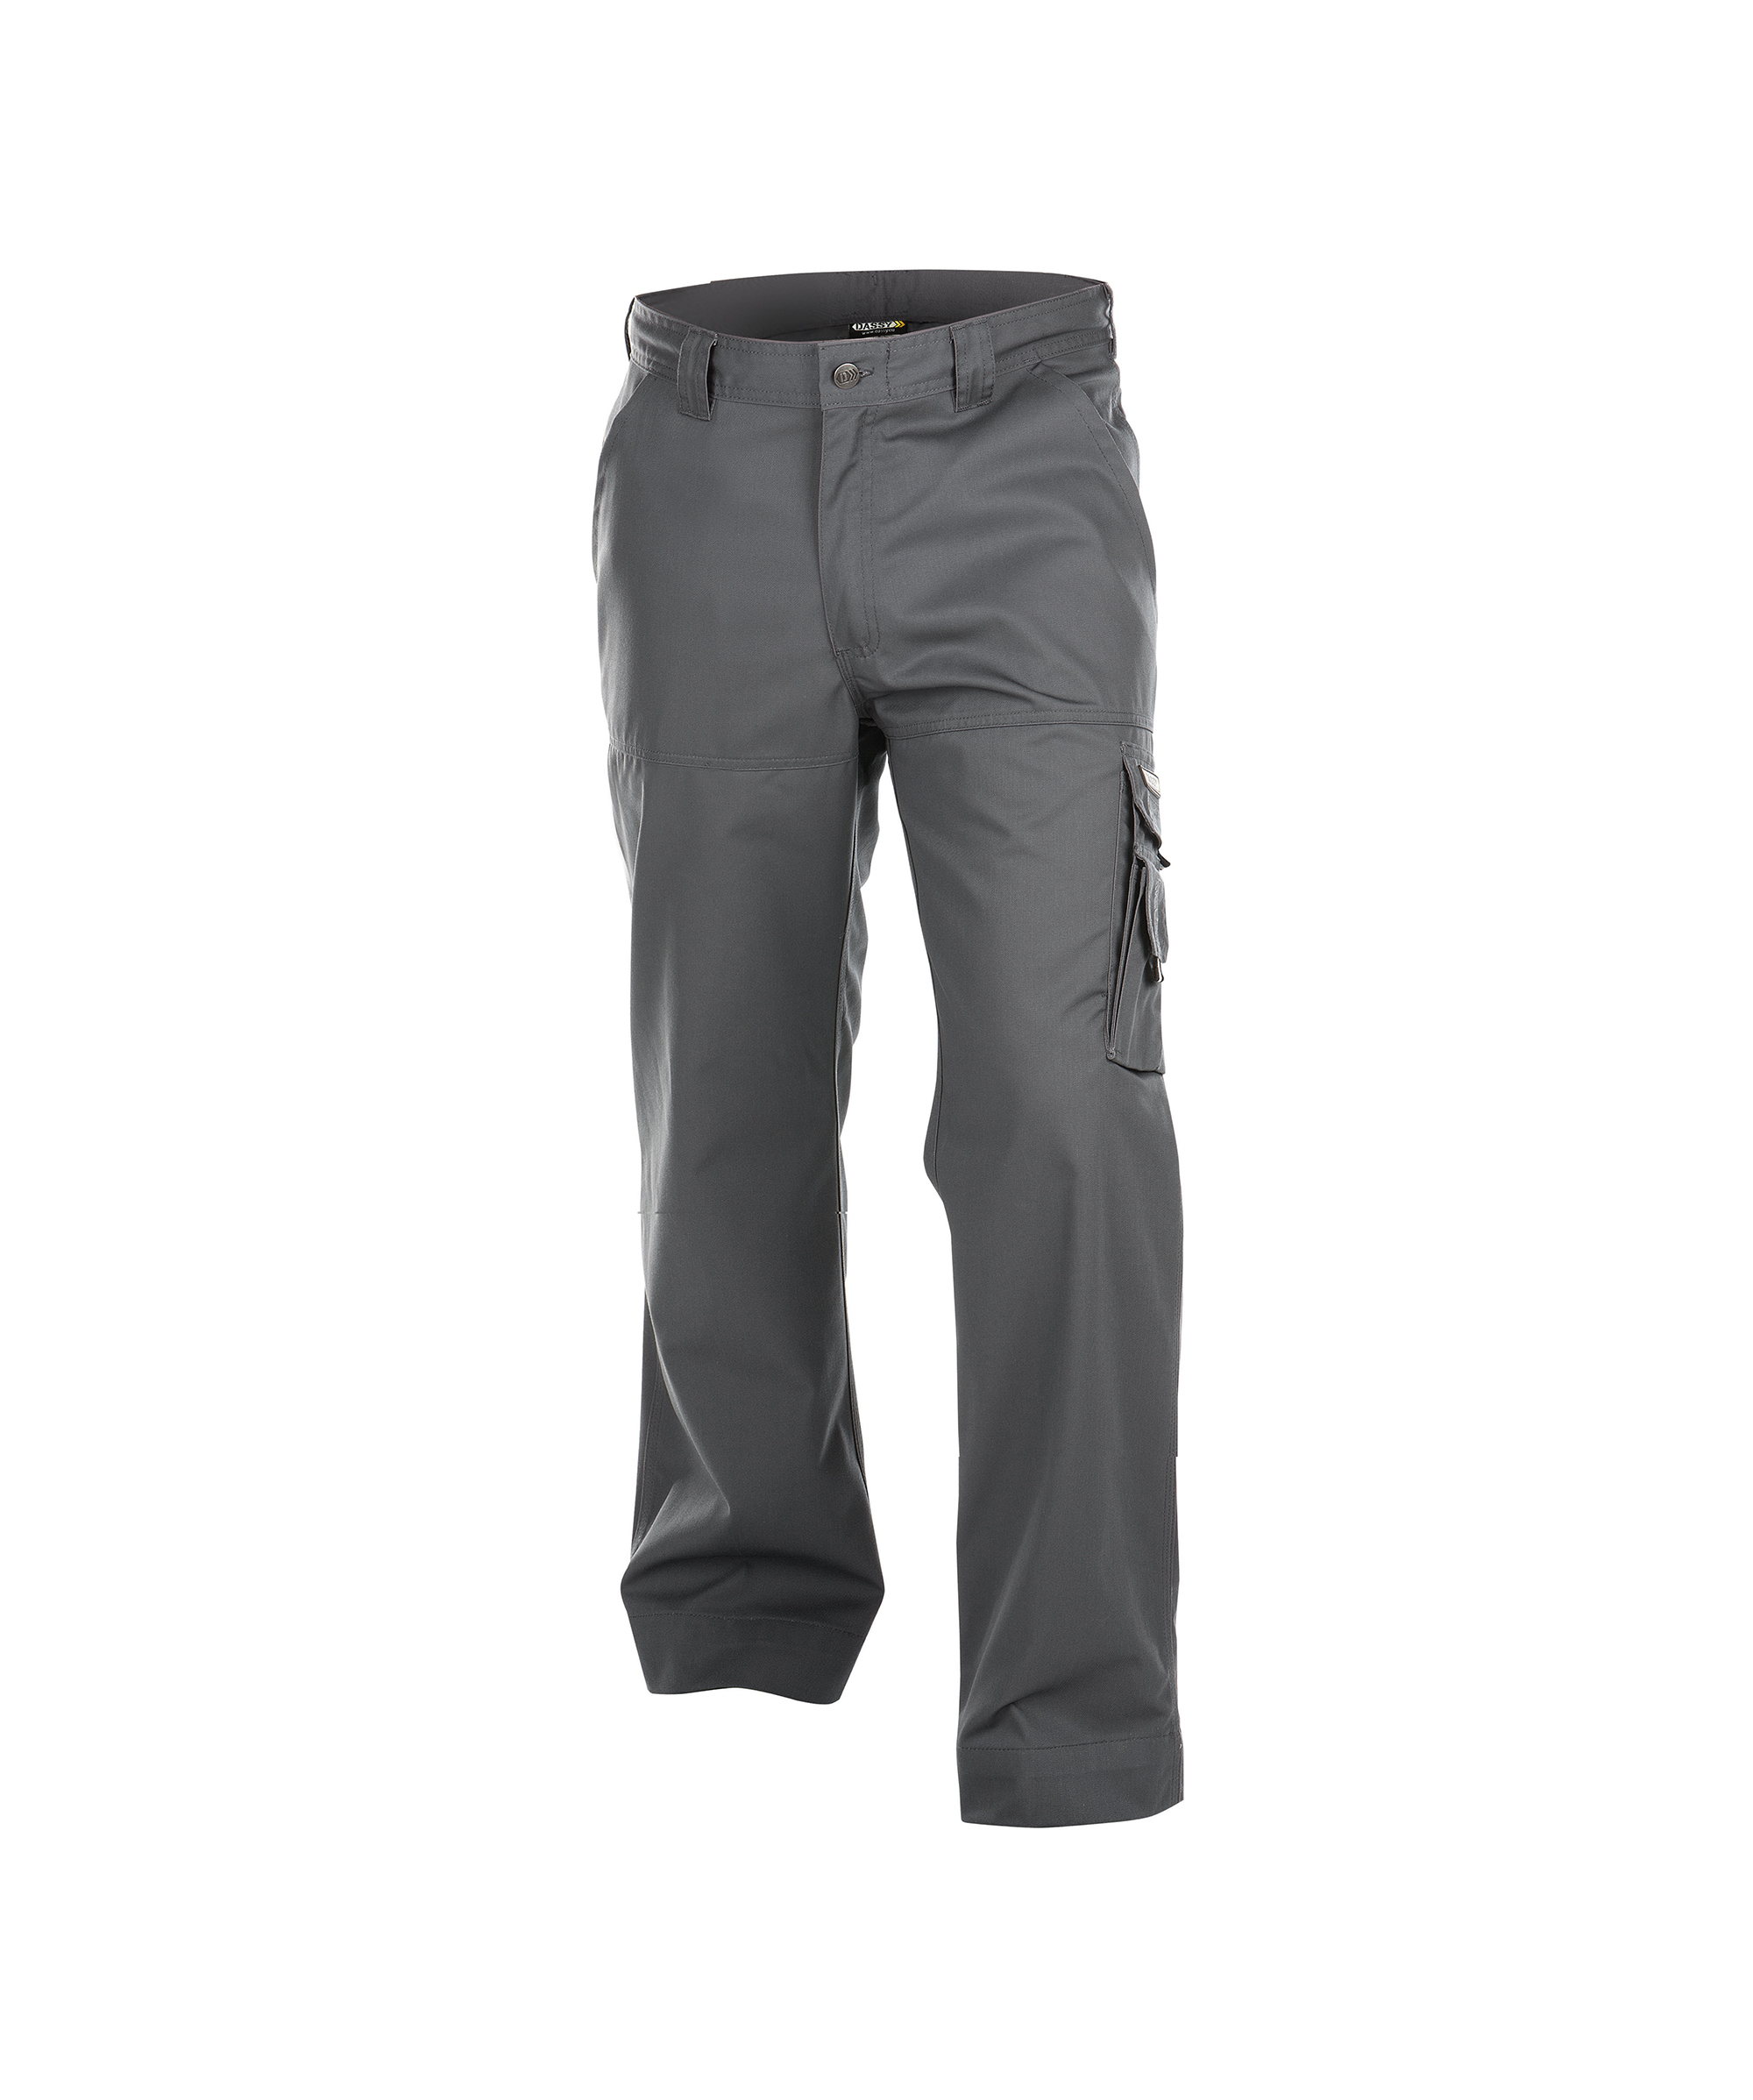 LIVERPOOL-Women_Work-trousers_cement-grey_FRONT.jpg